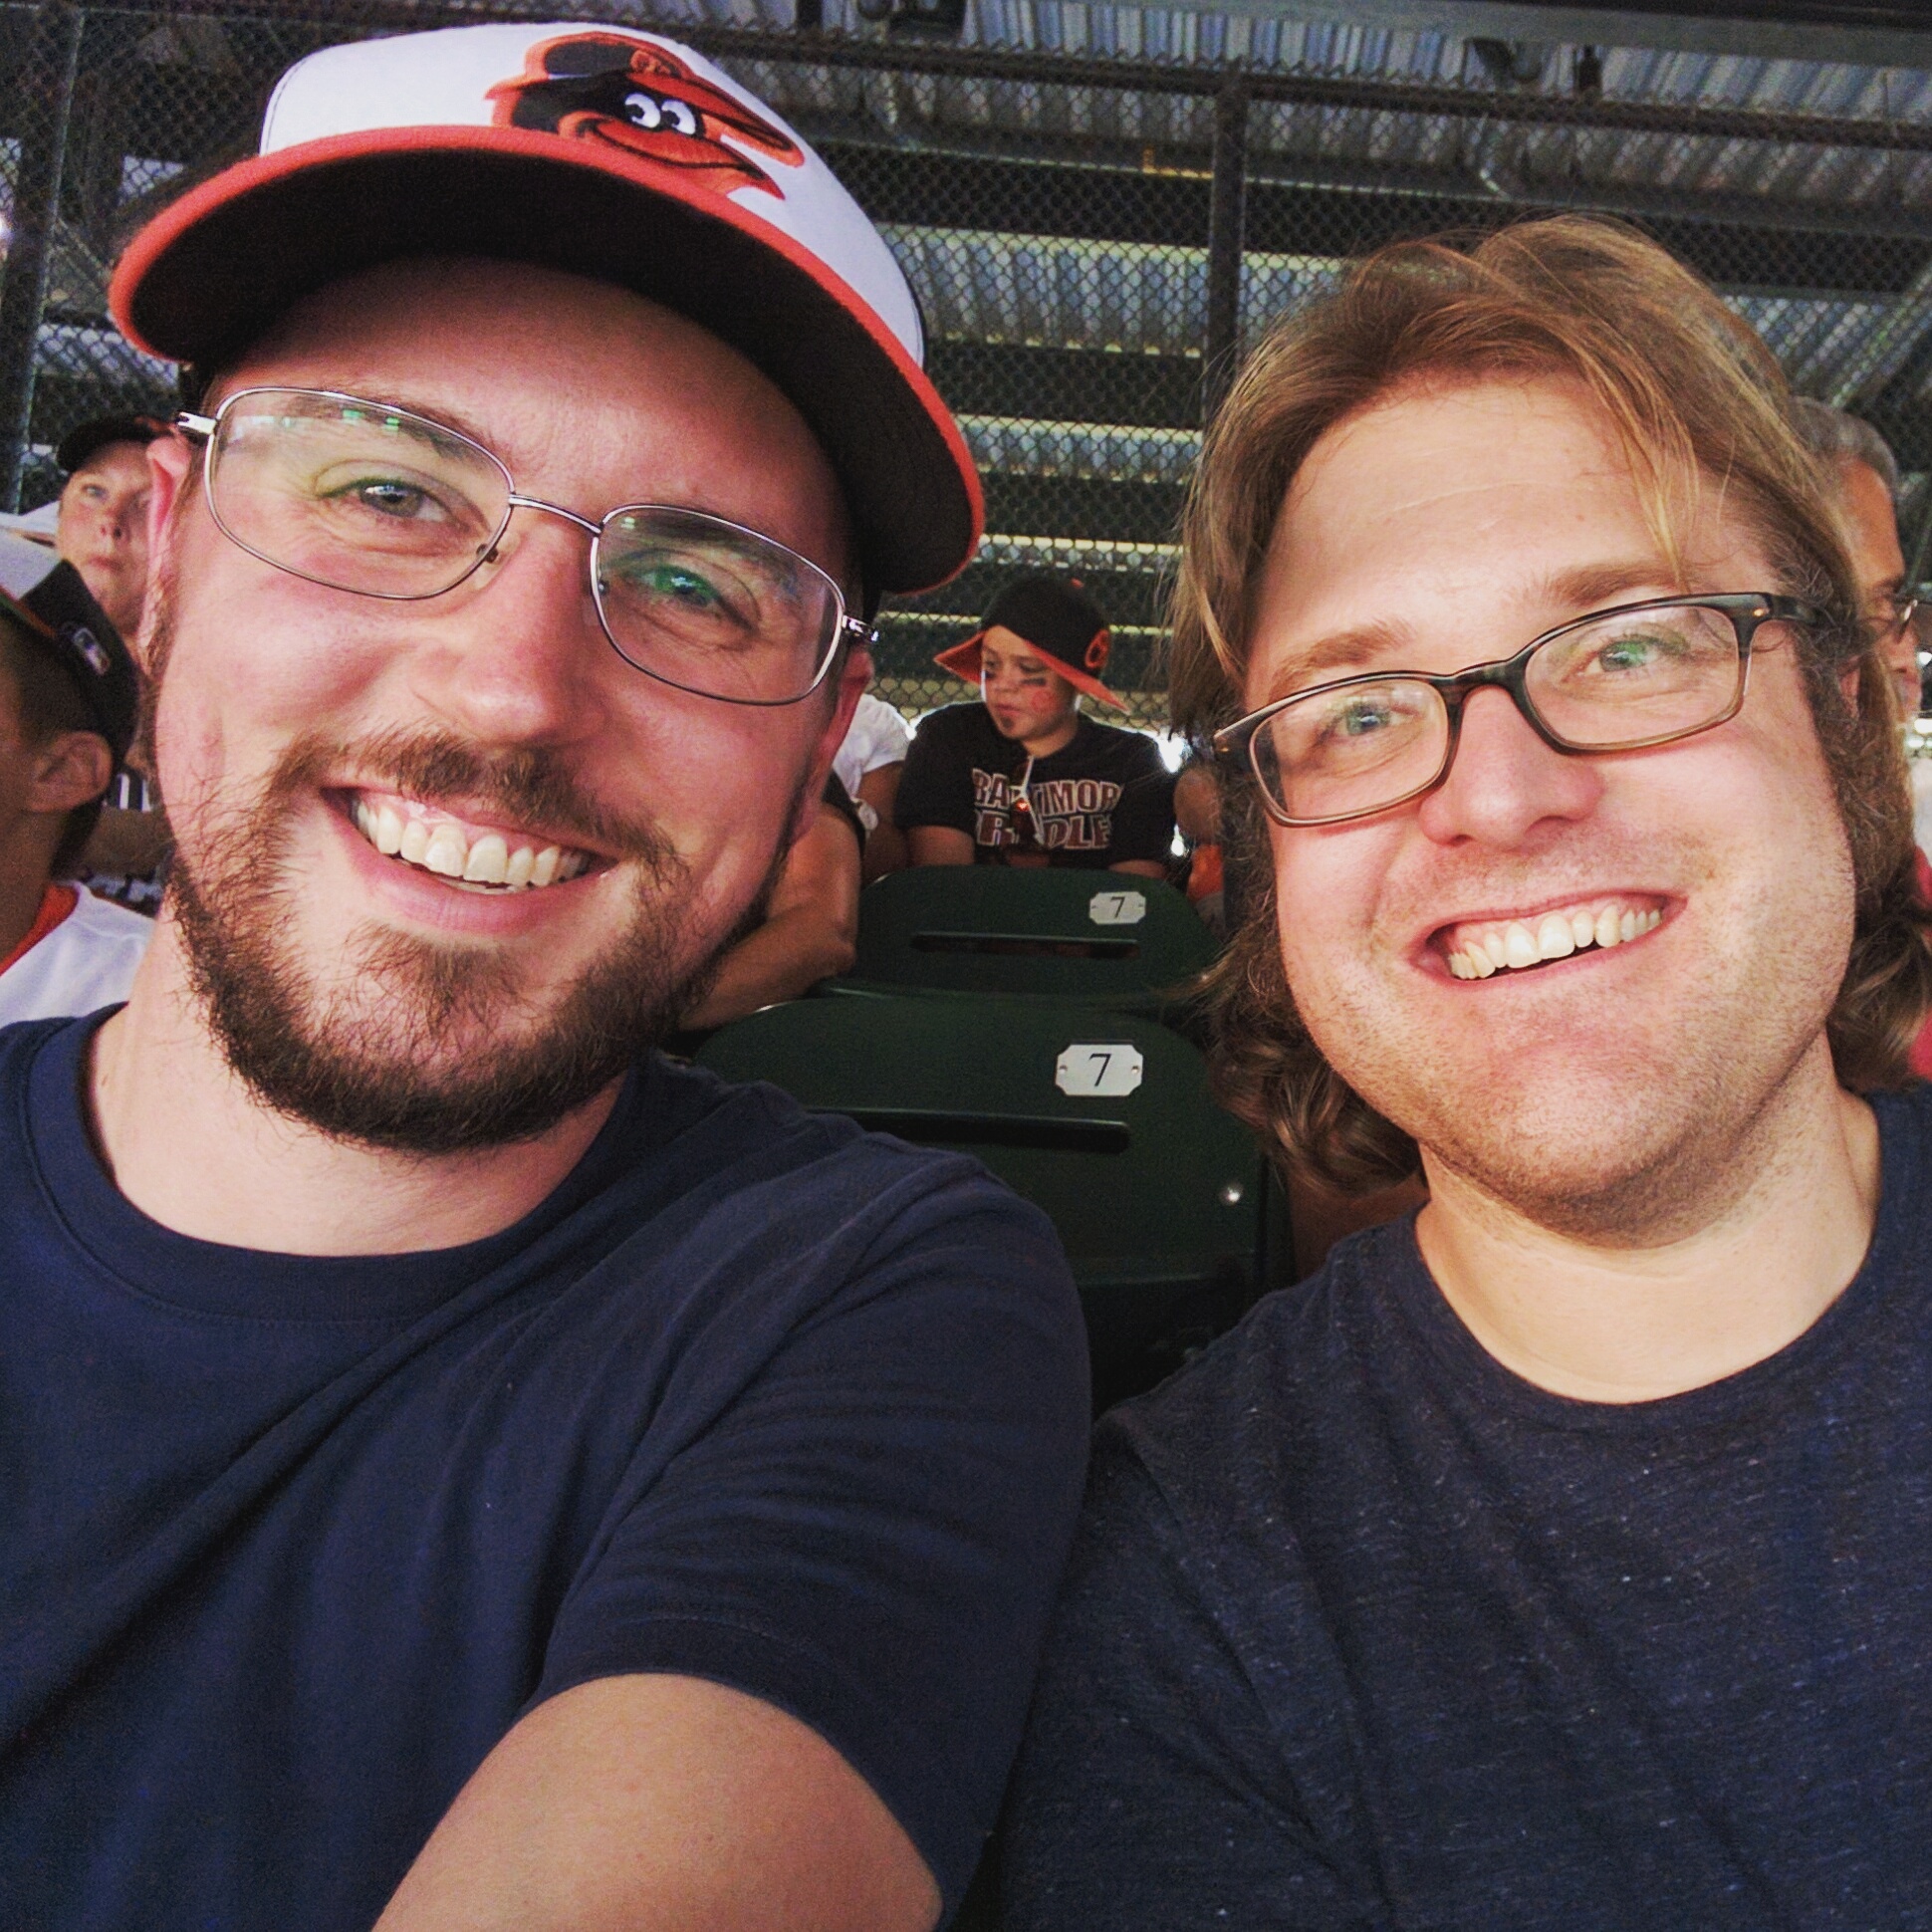 Photo of Gavin McGimpsey and a friend at Oriole Park in Camden Yards. Gavin is wearing an Orioles baseball cap.